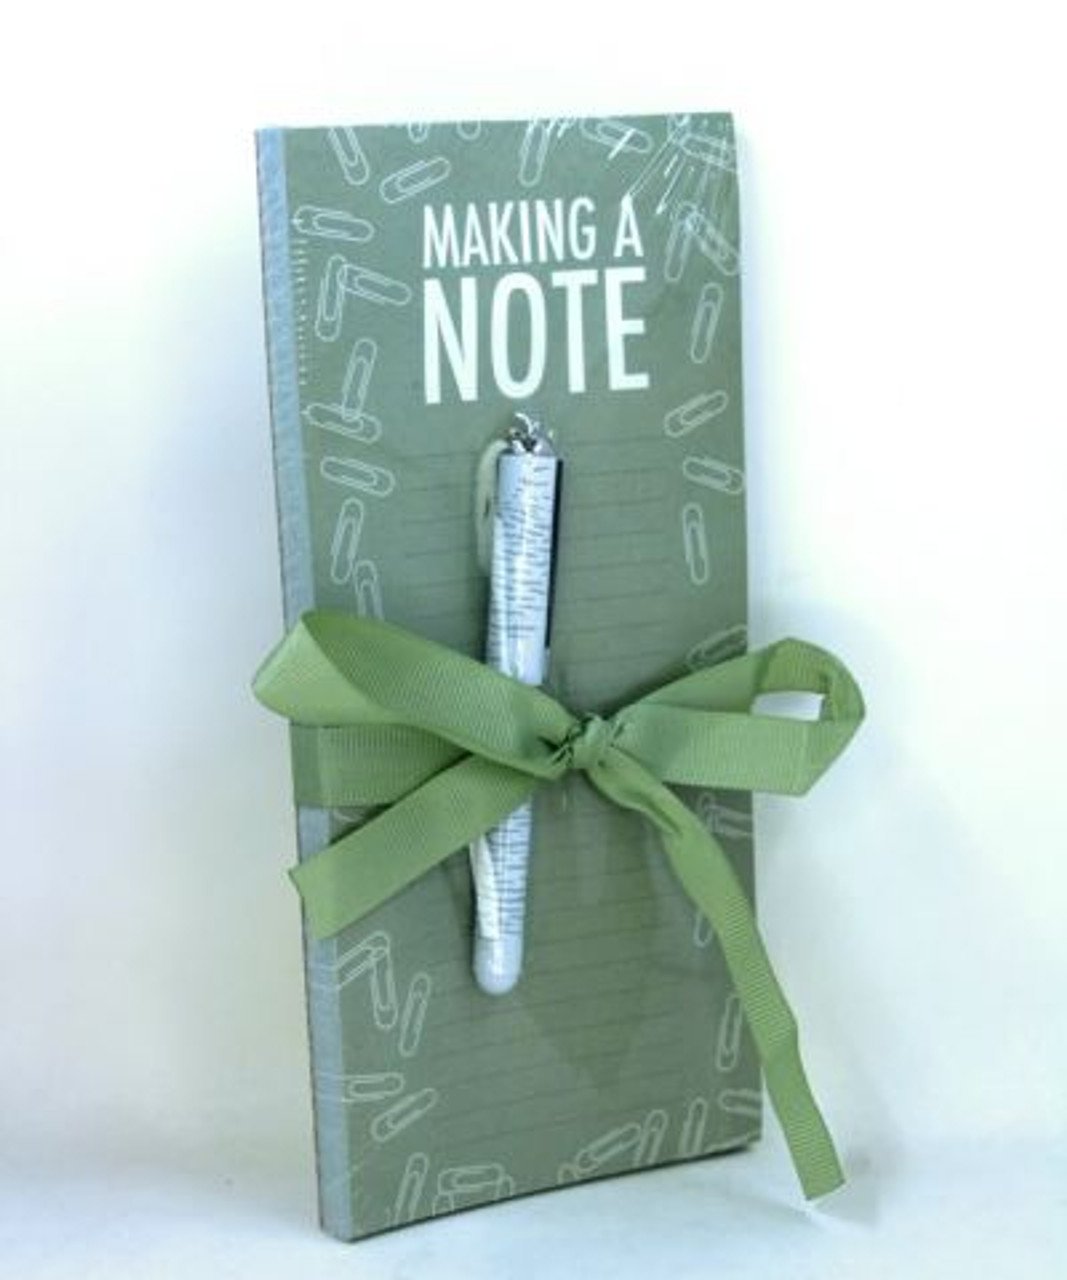 Magnetic Notepad with Pen: Making A Note (While Supplies Last)*